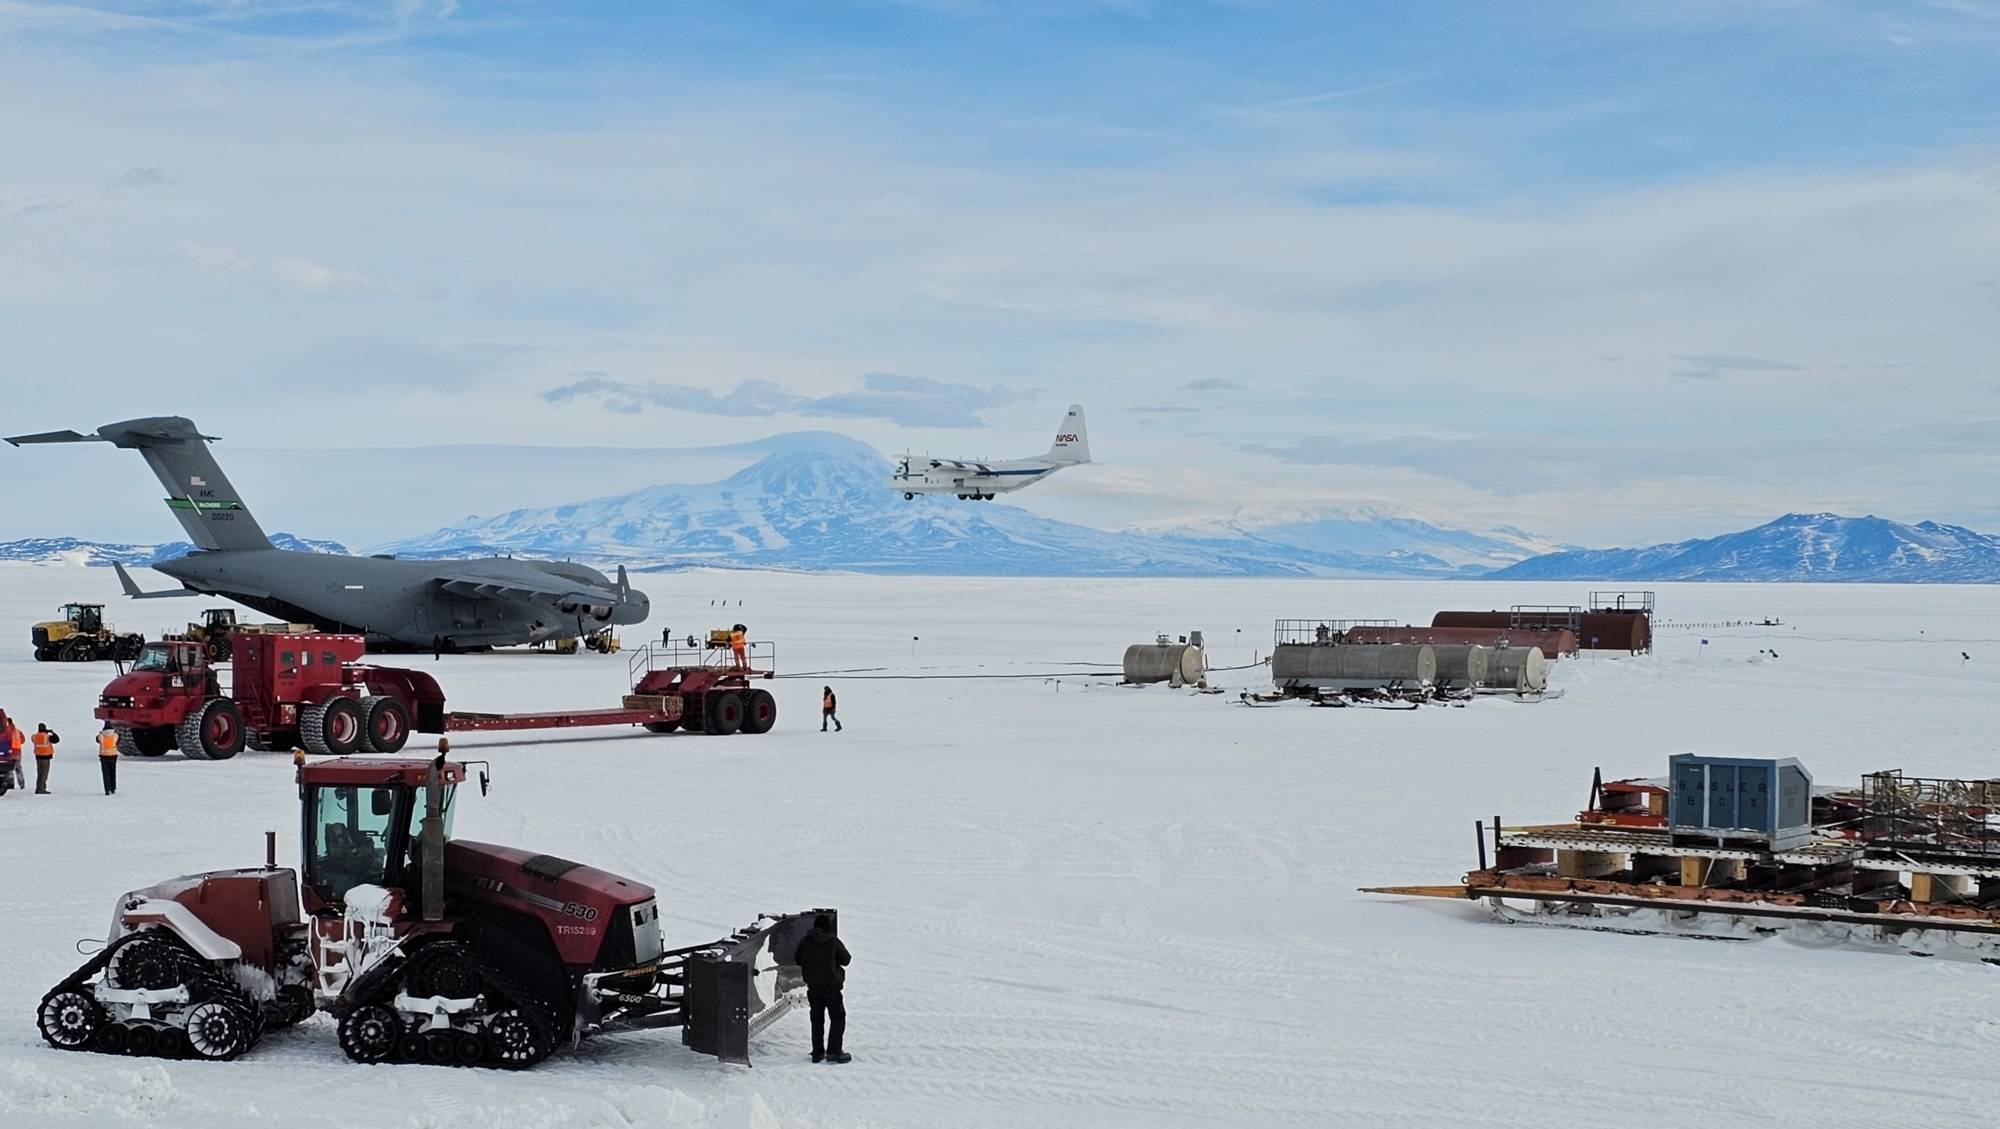 Tractors and other heavy machinery rest on the snowy plain in the foreground. In the middle of the image, a dark gray aircraft sits on the ground as a smaller white aircraft, NASA's C-130, lands.